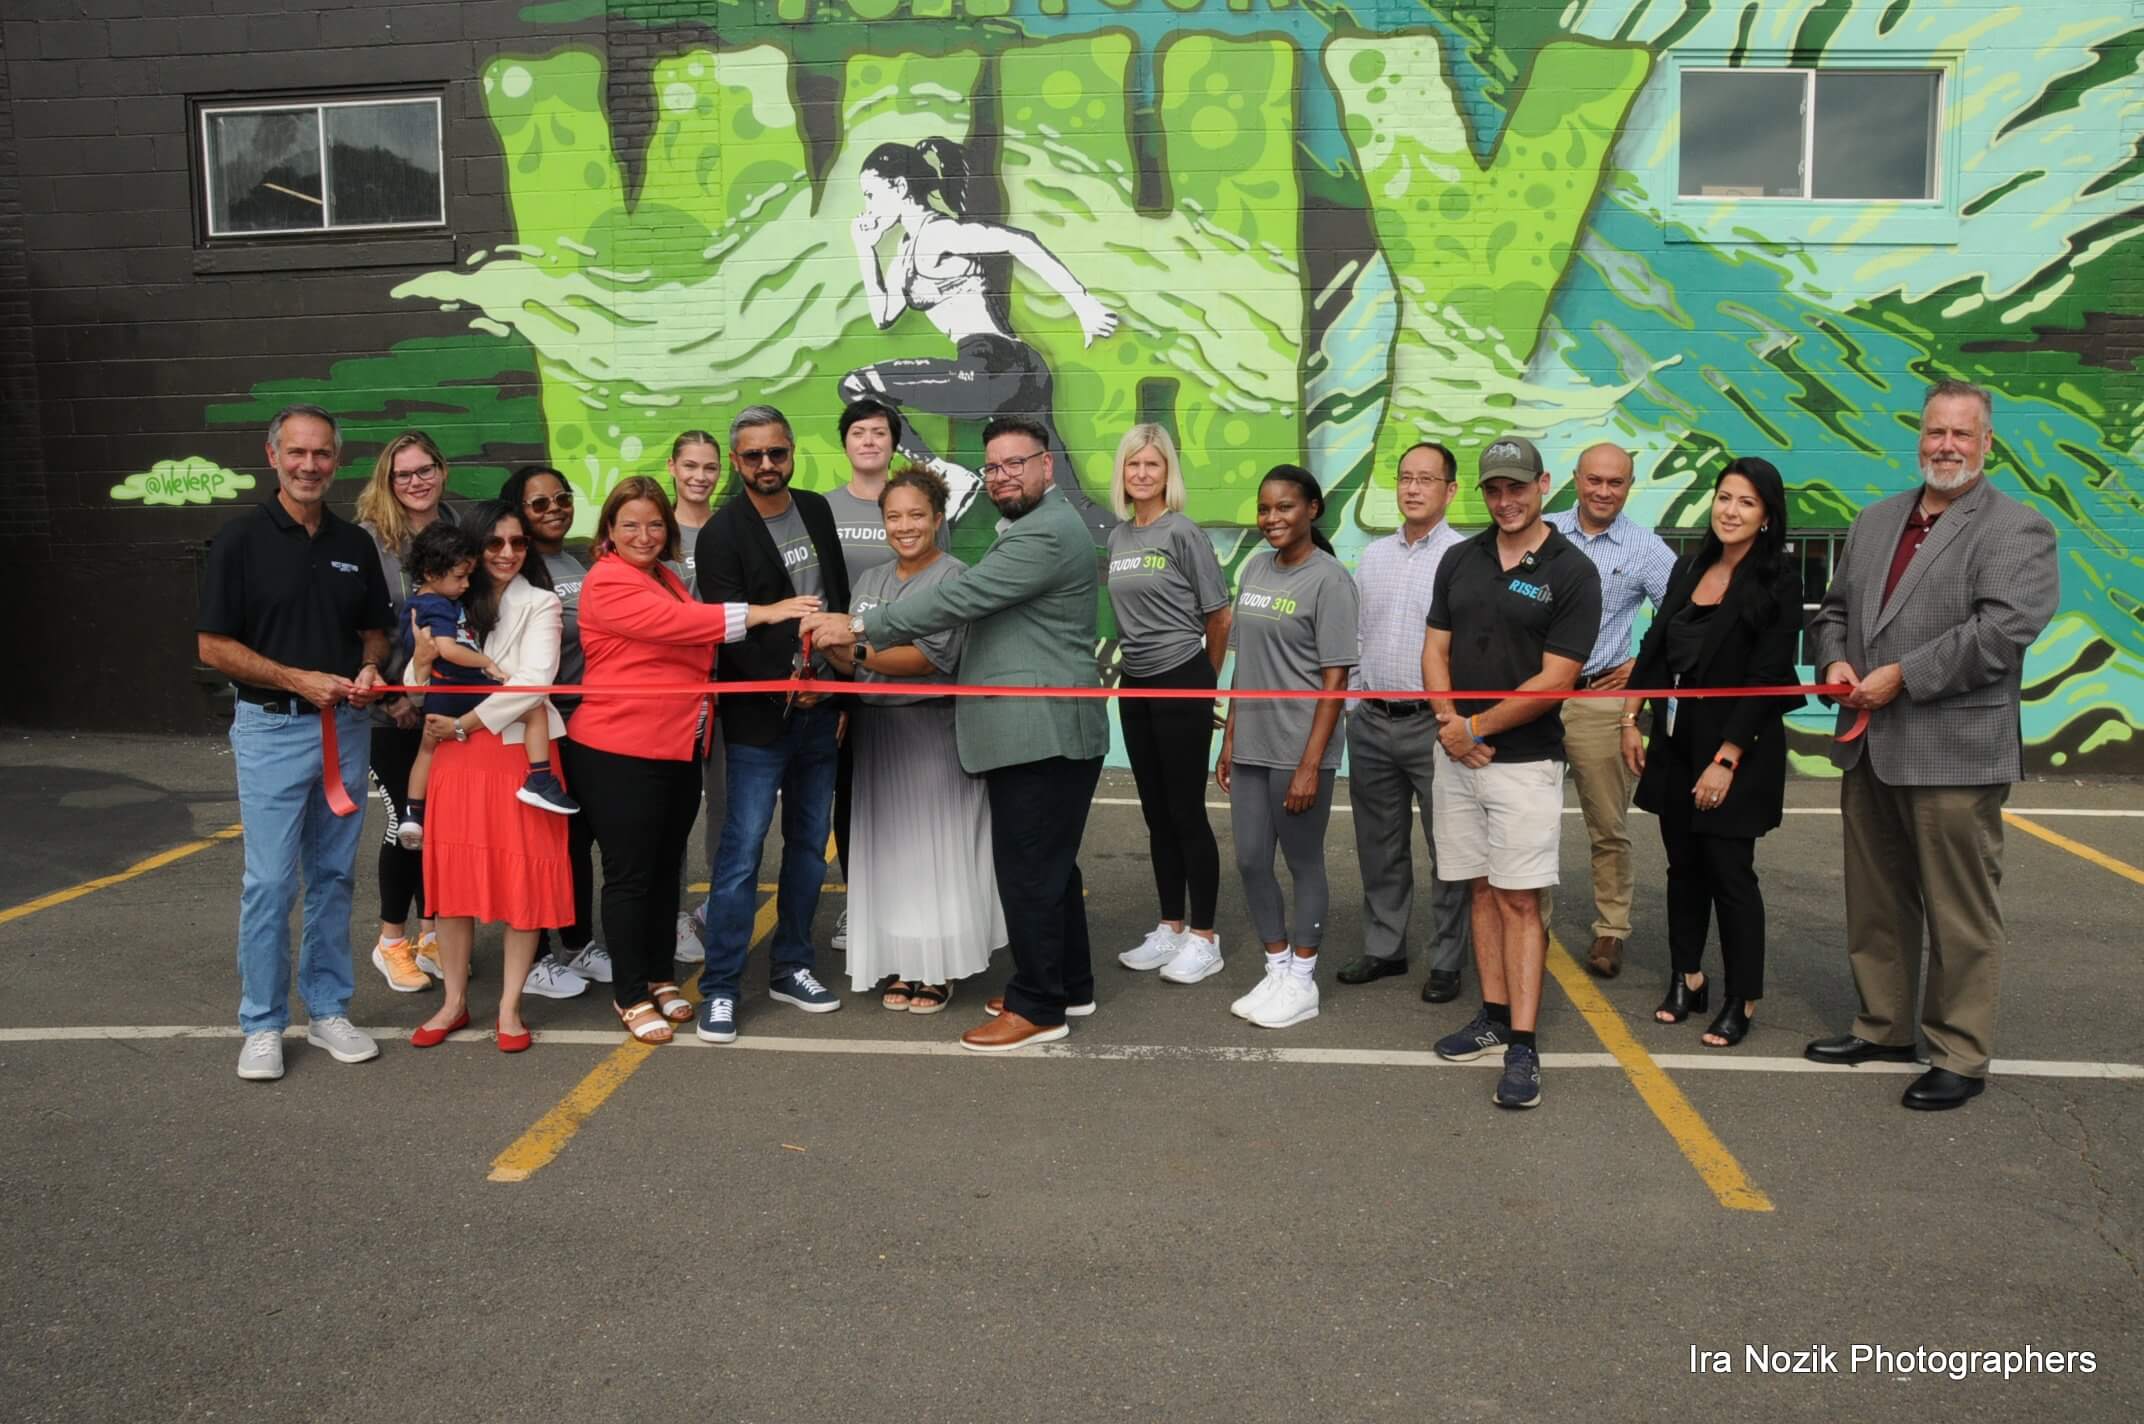 Ribbon Cutting in front of a large mural